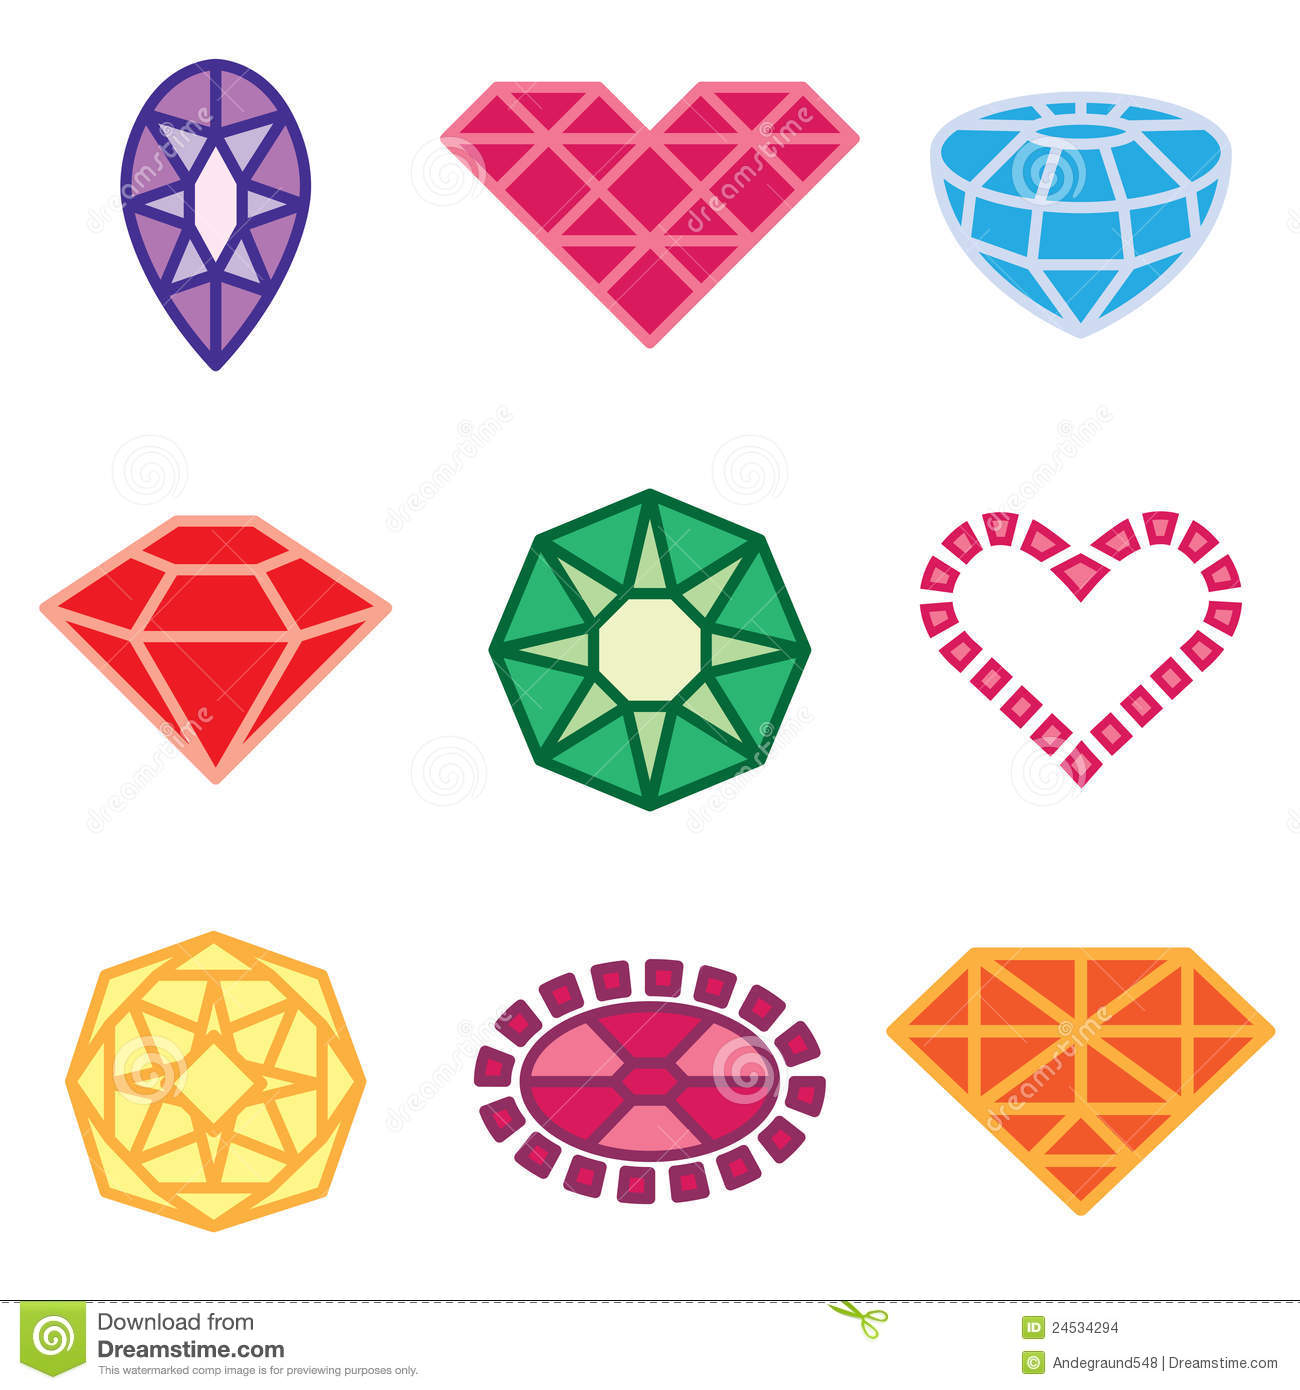 Jewels clipart free 3 » Clipart Station.